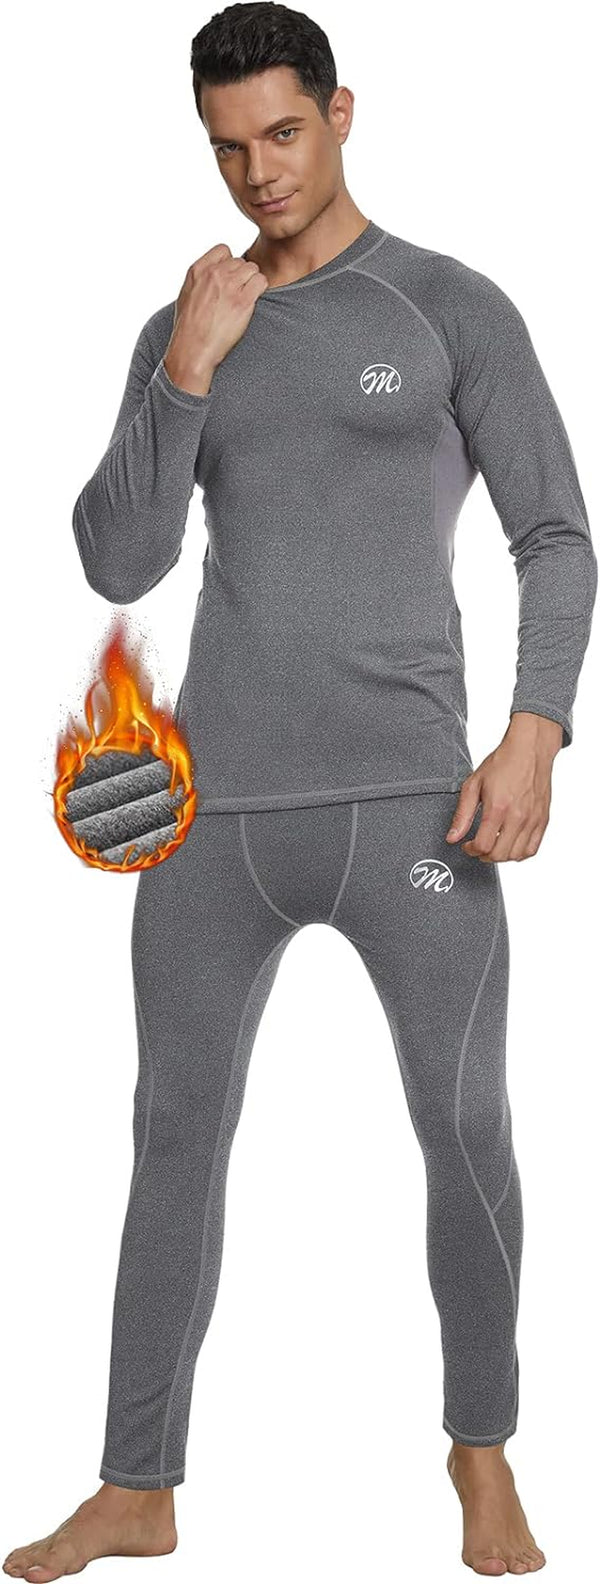 Ultra Thermal Underwear legging for Men, Winter Base Layer Set Tops & Long Johns Winter Ski Cold Weather Gear for Heat Retention